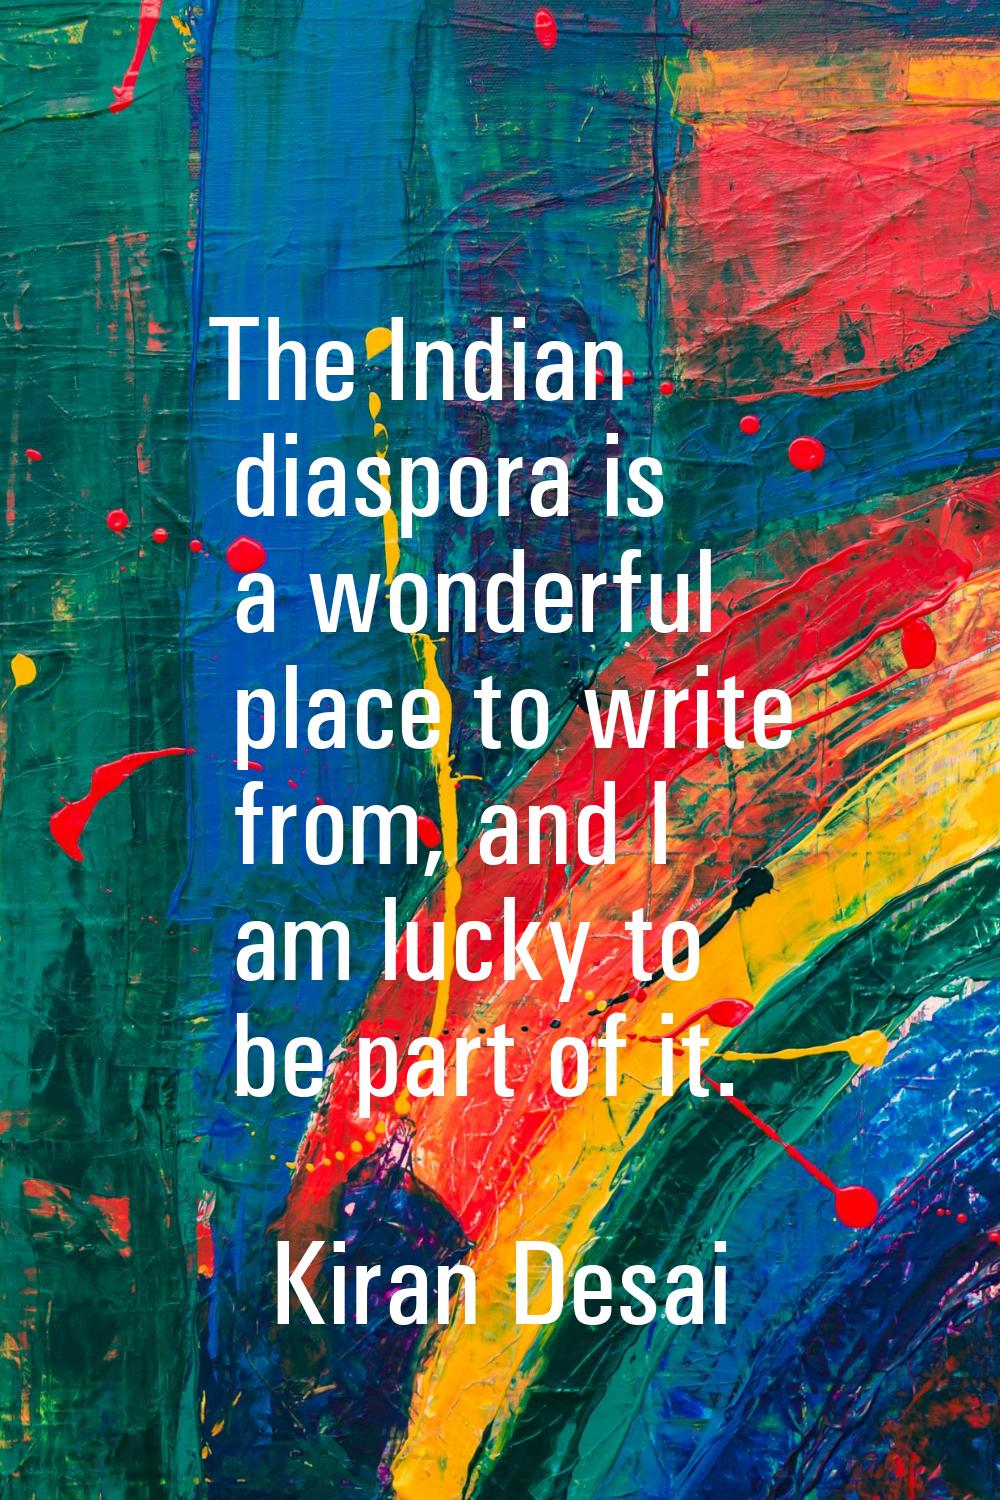 The Indian diaspora is a wonderful place to write from, and I am lucky to be part of it.